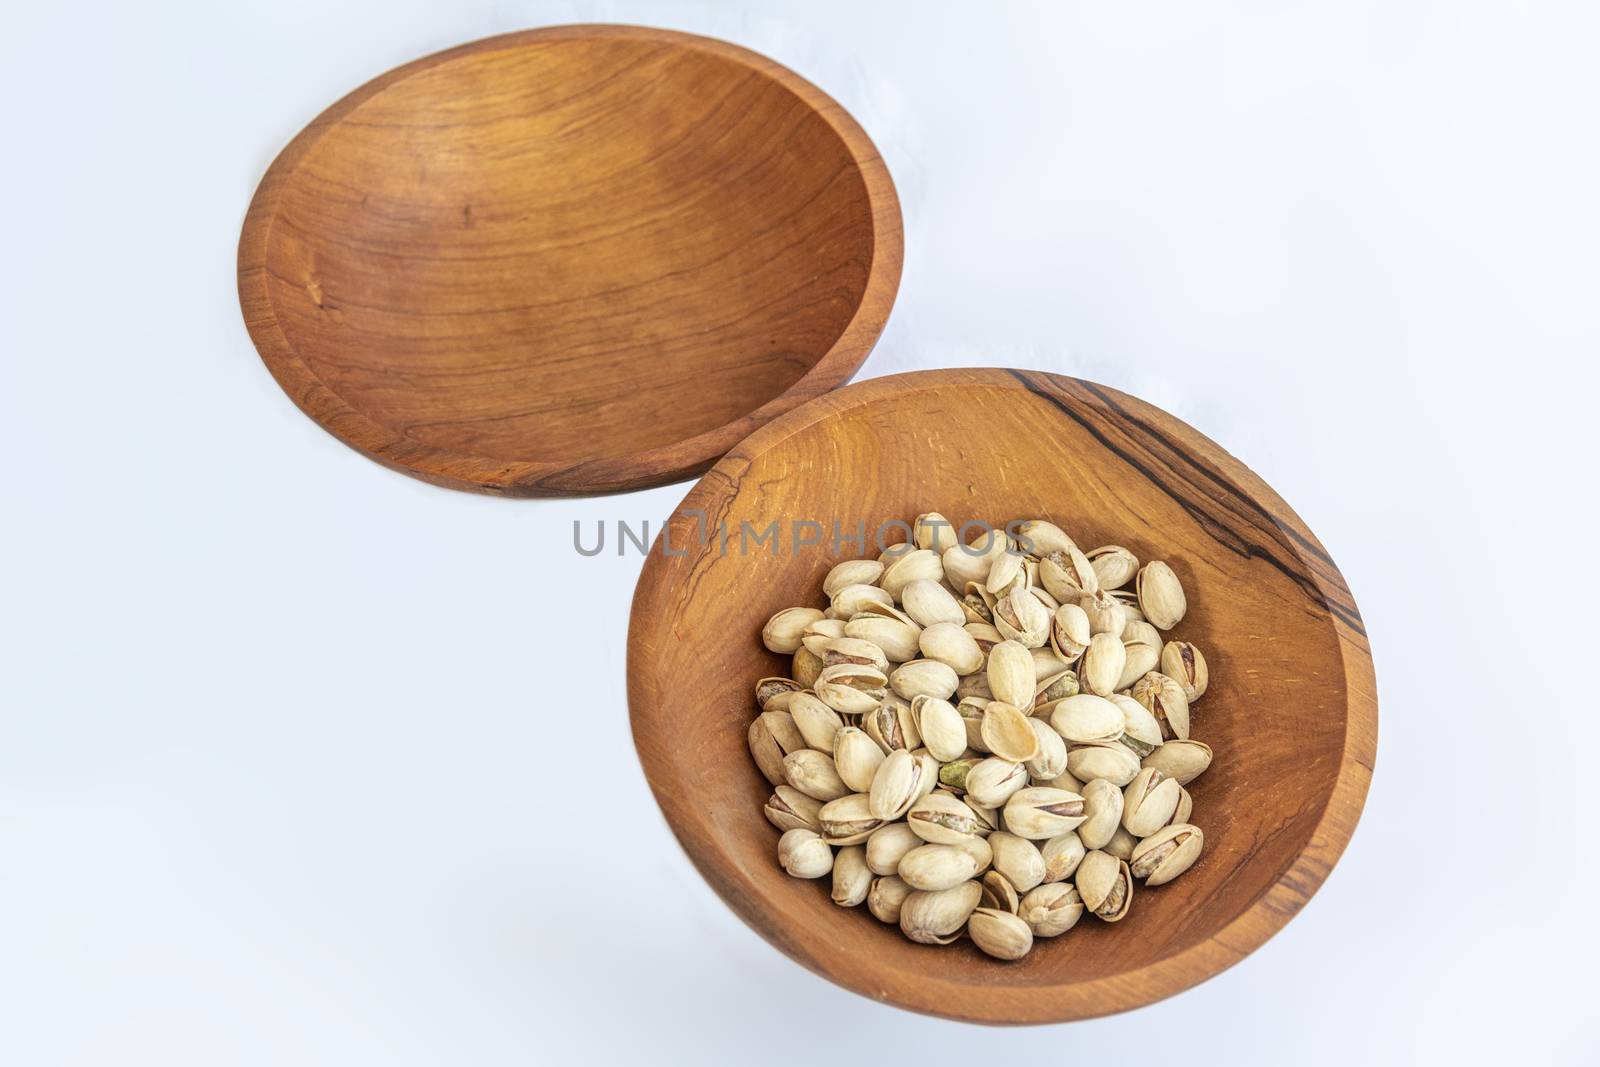 Pistachios in wooden bol as appertiser with drinks against a white background by ankorlight